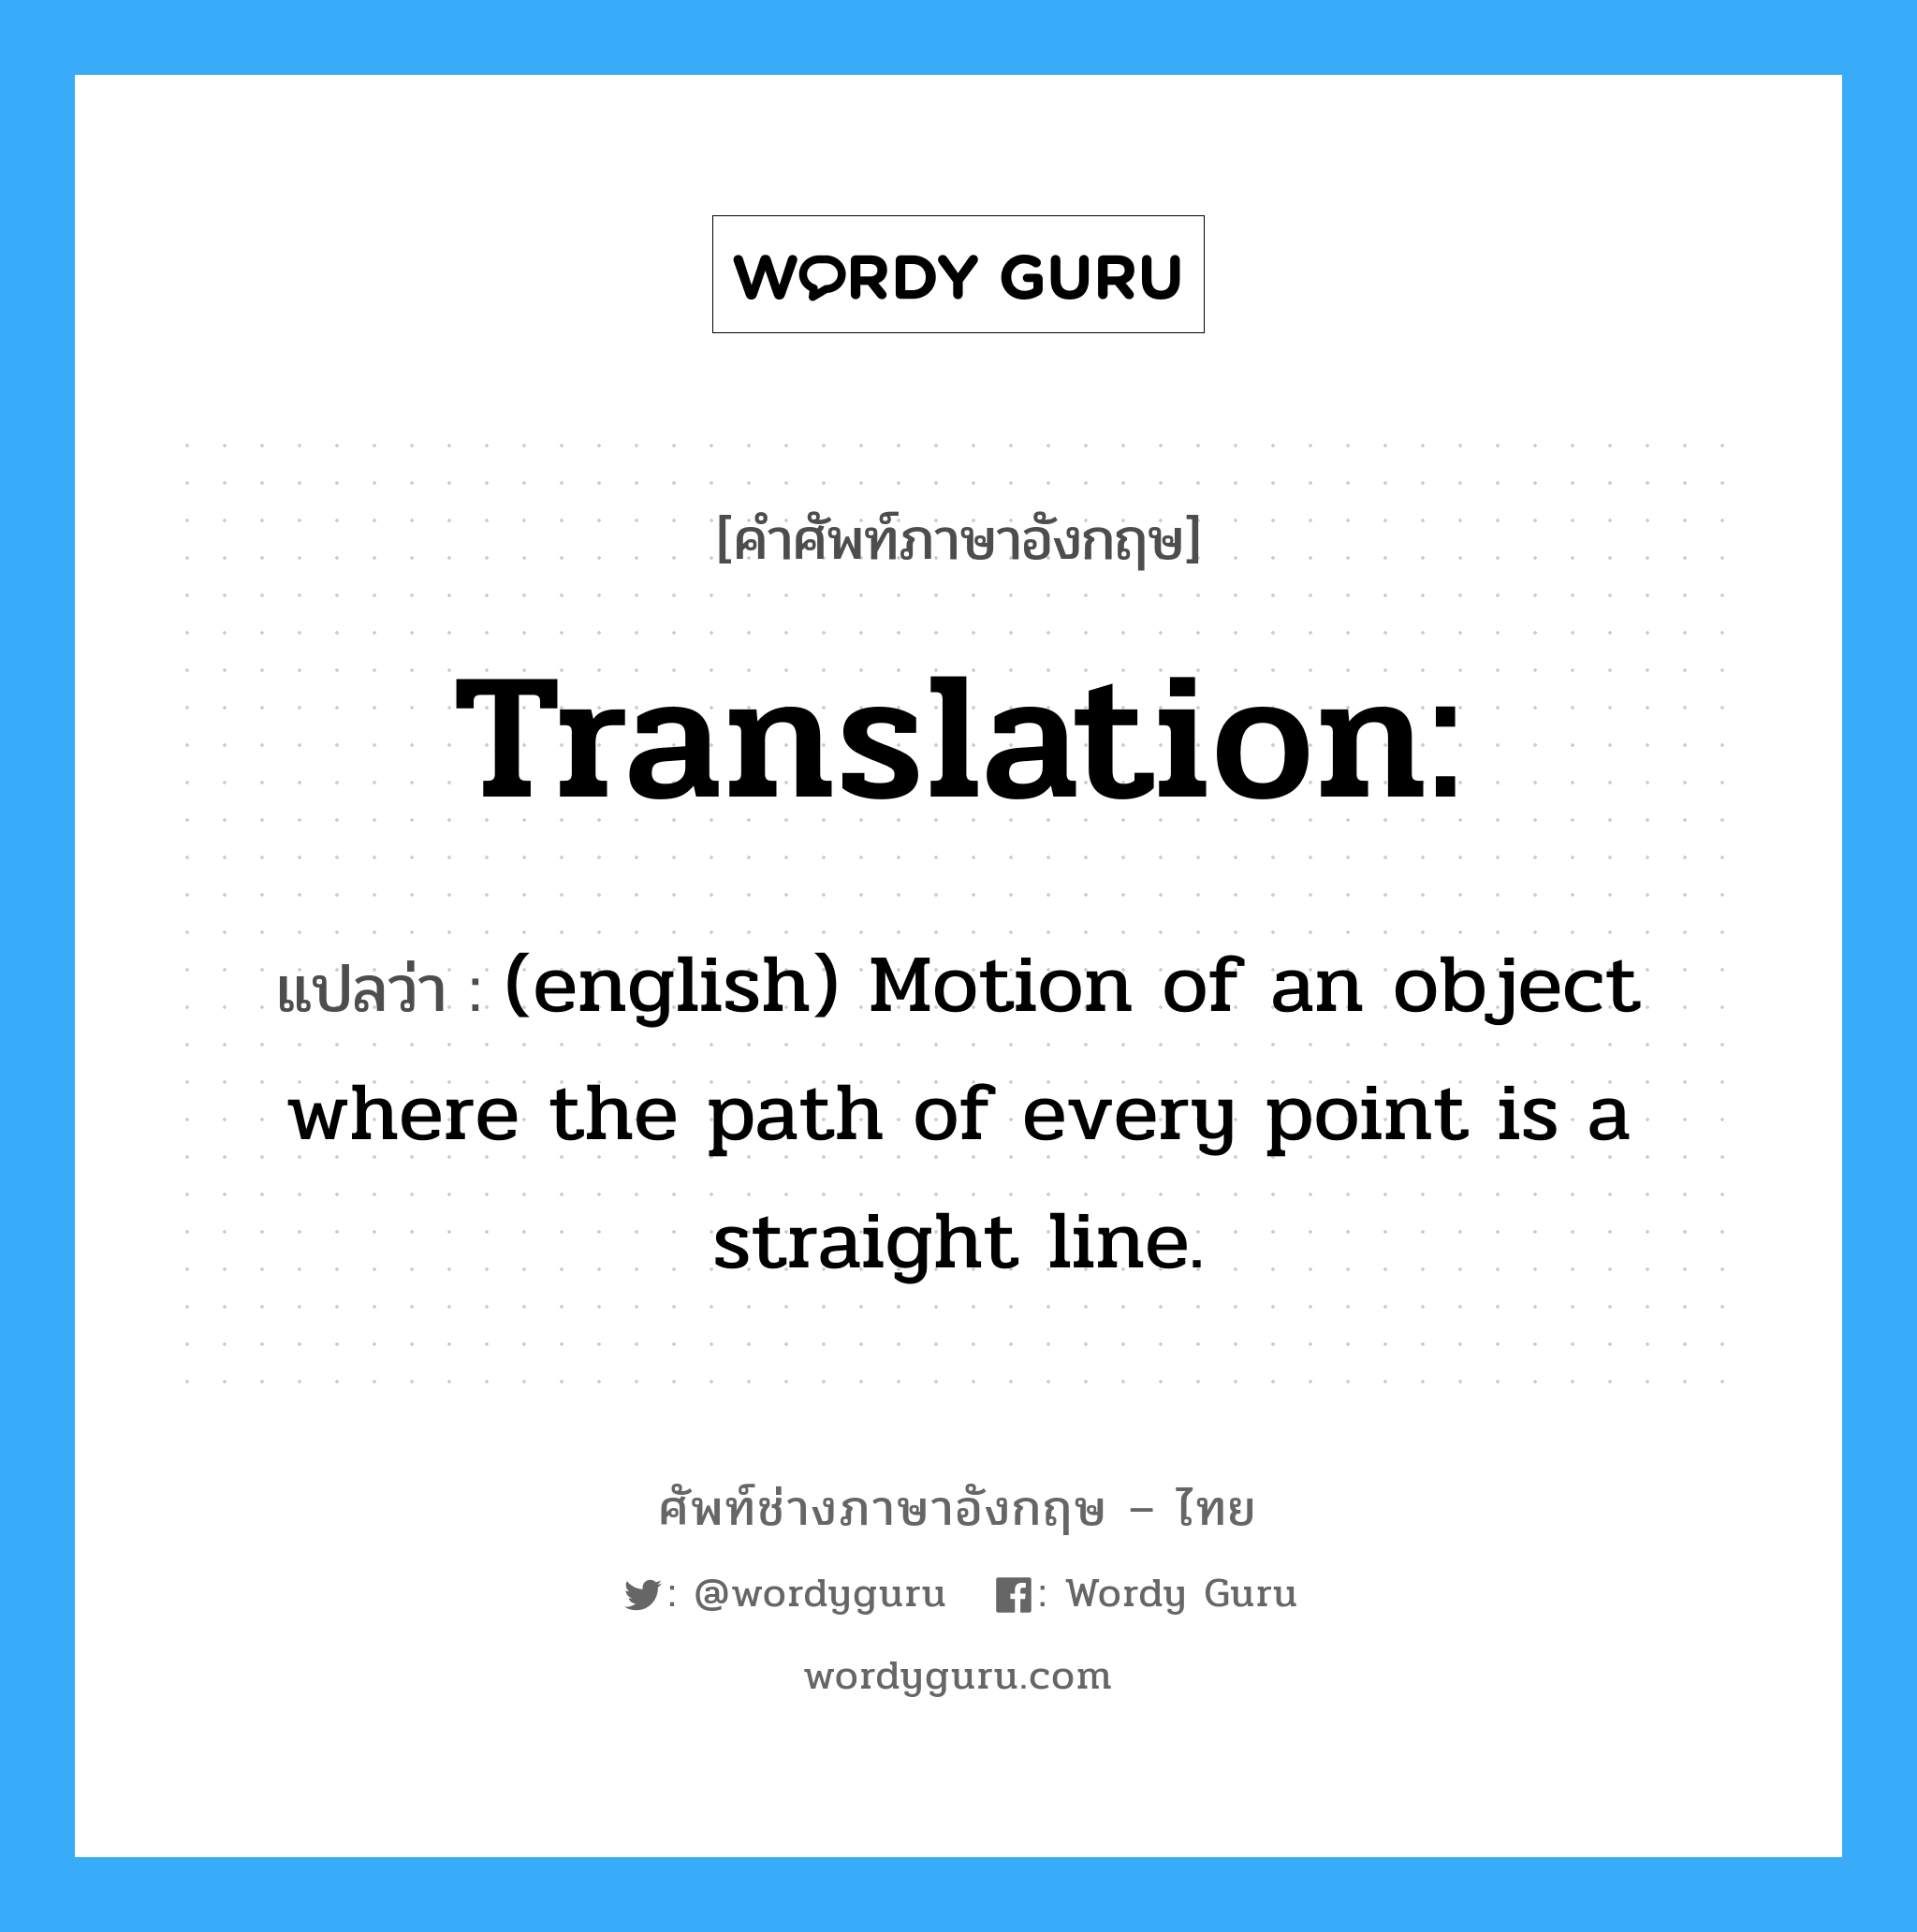 Translation: แปลว่า?, คำศัพท์ช่างภาษาอังกฤษ - ไทย Translation: คำศัพท์ภาษาอังกฤษ Translation: แปลว่า (english) Motion of an object where the path of every point is a straight line.